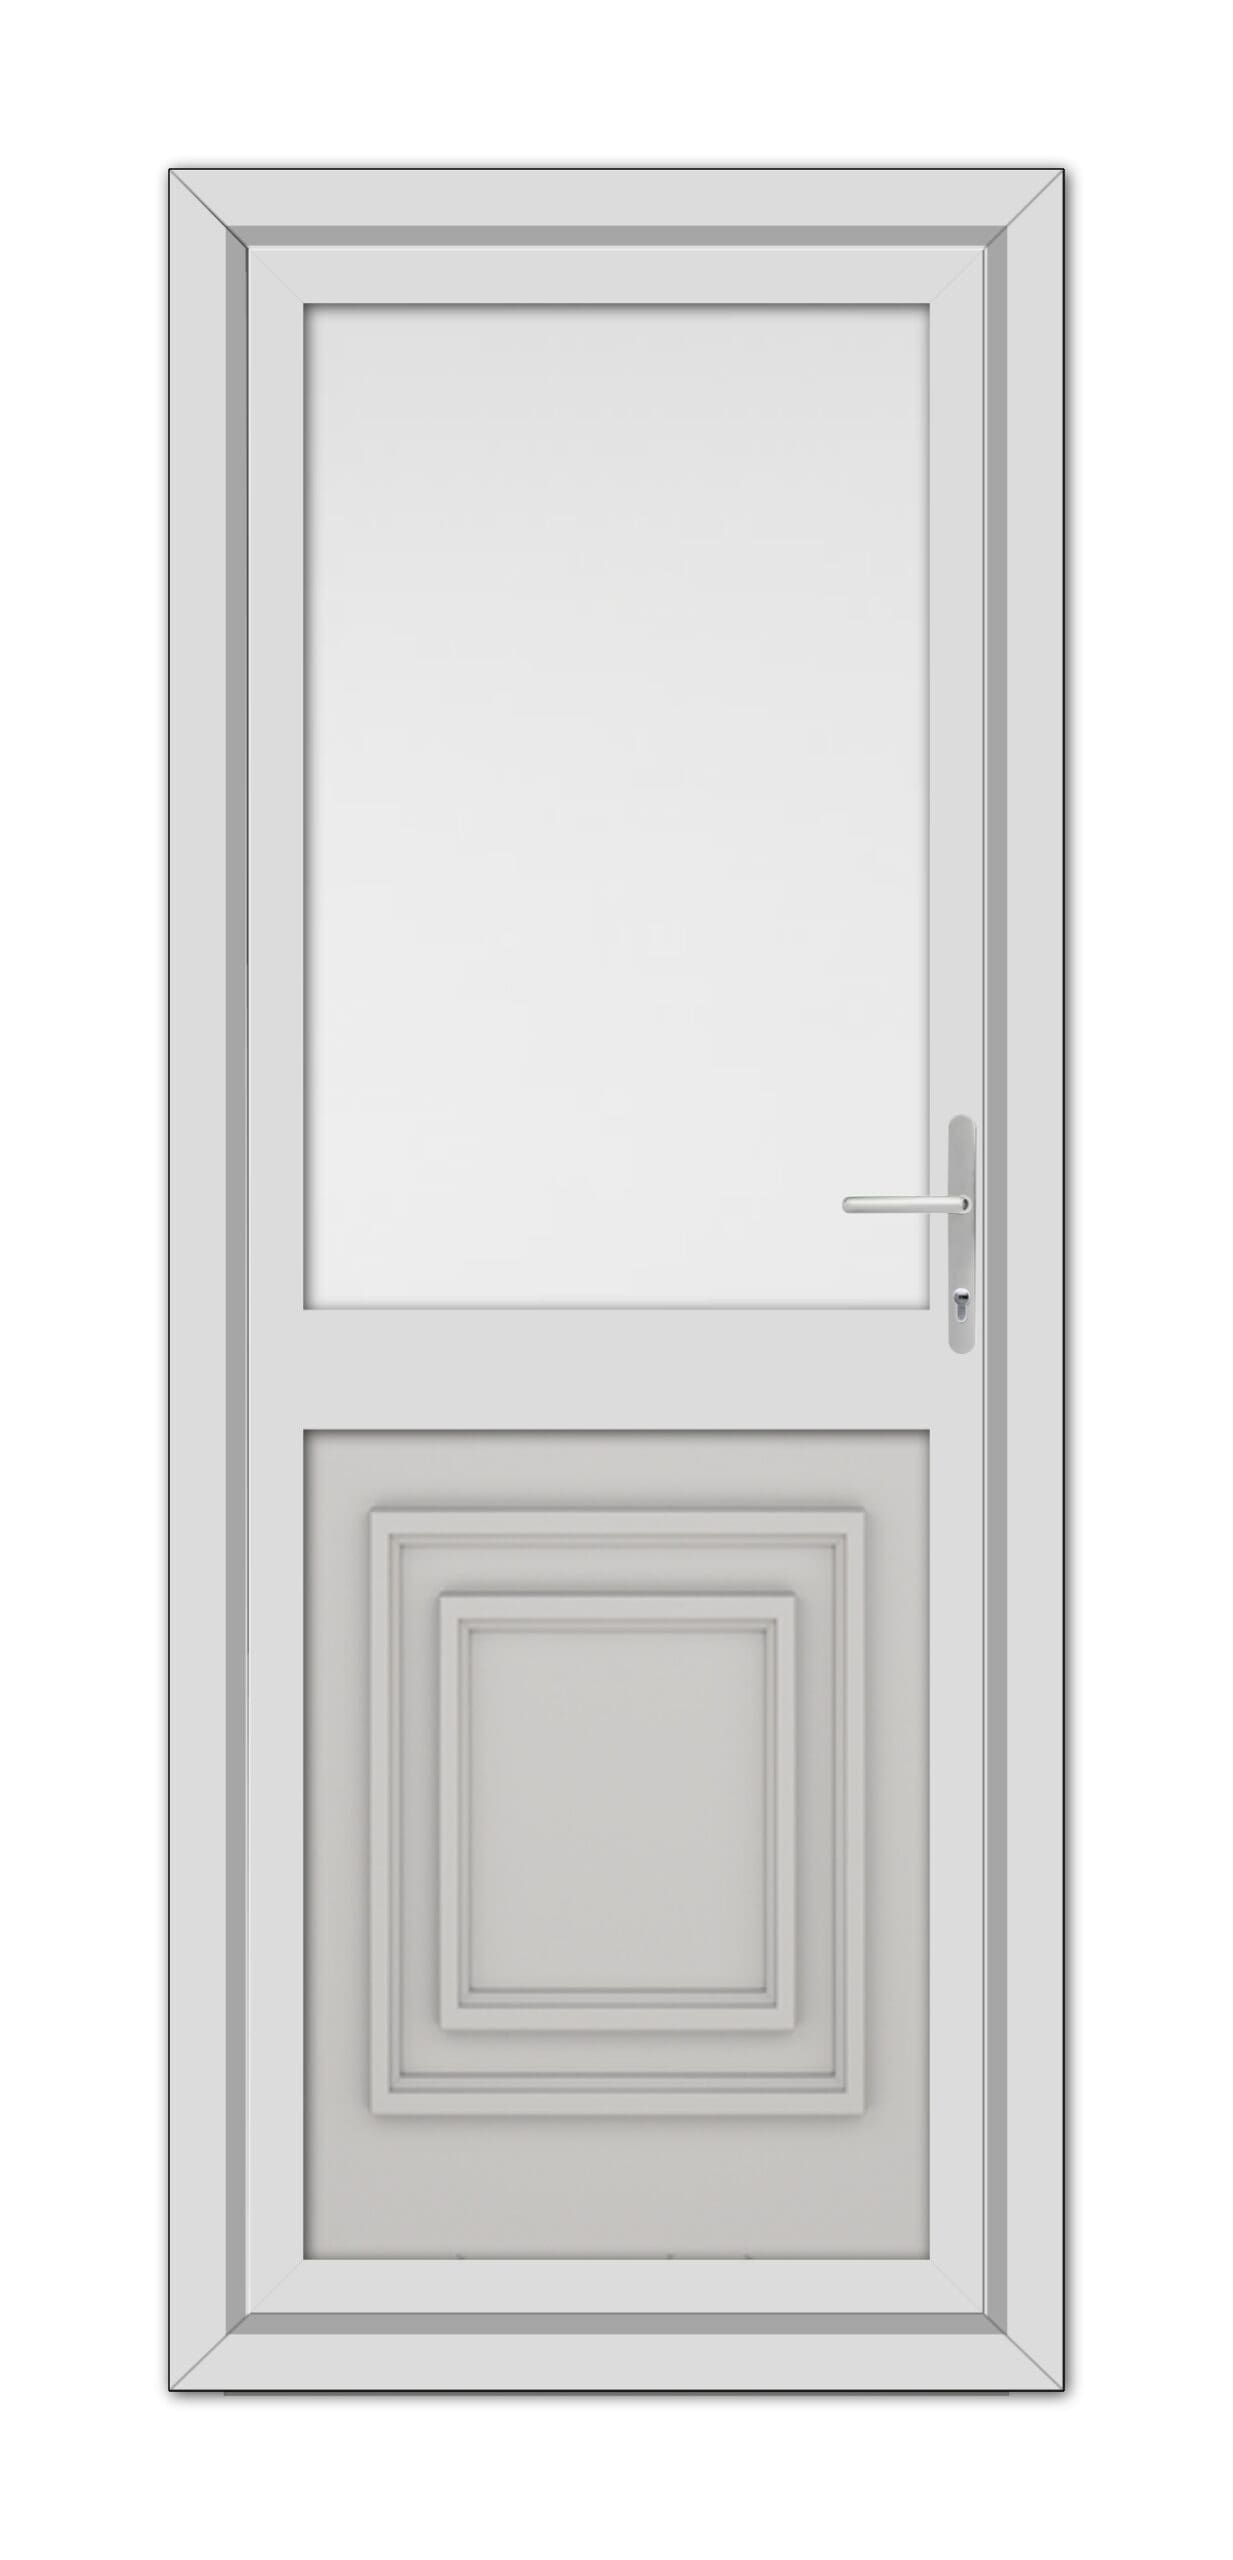 A Silver Grey Hannover Half uPVC Back Door with a modern design featuring a square window at the top and a decorative recessed panel below, equipped with a metallic handle on the right side.